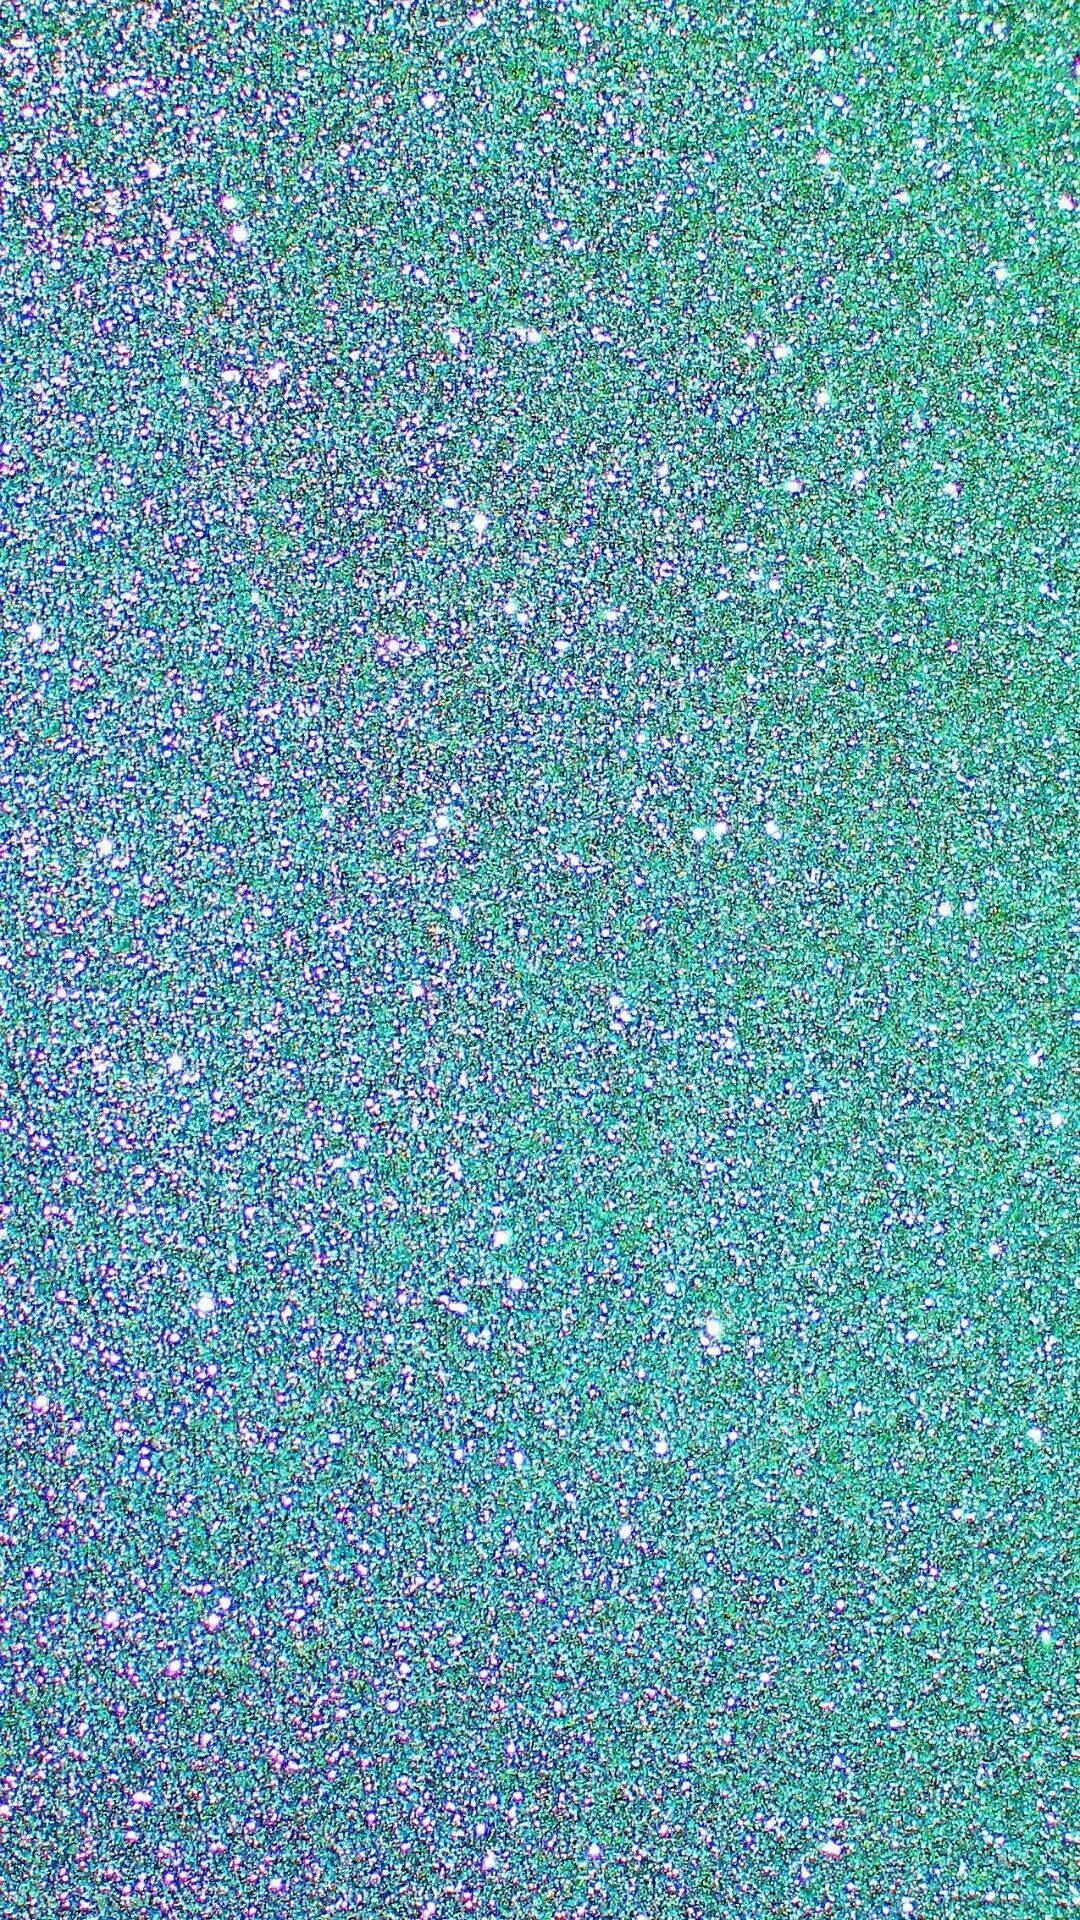 Sparkle: Glitter, A very small pieces of shiny material used to decorate a surface. 1080x1920 Full HD Wallpaper.